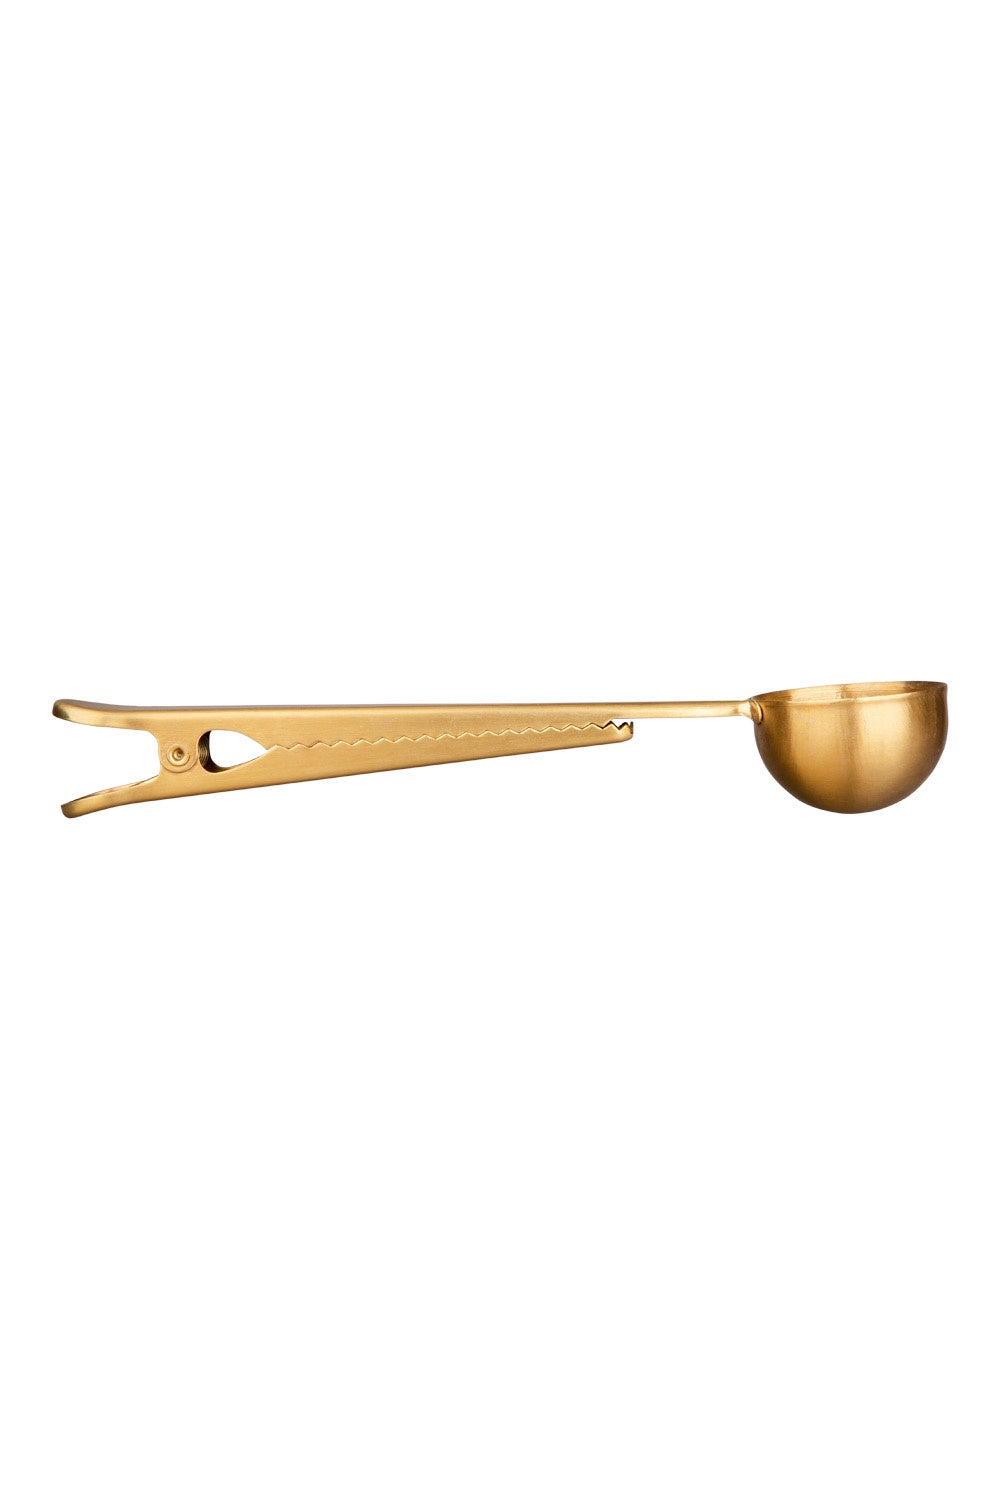 Tranquillo Coffee Spoon - Gold-Homeware-Ohh! By Gum - Shop Sustainable